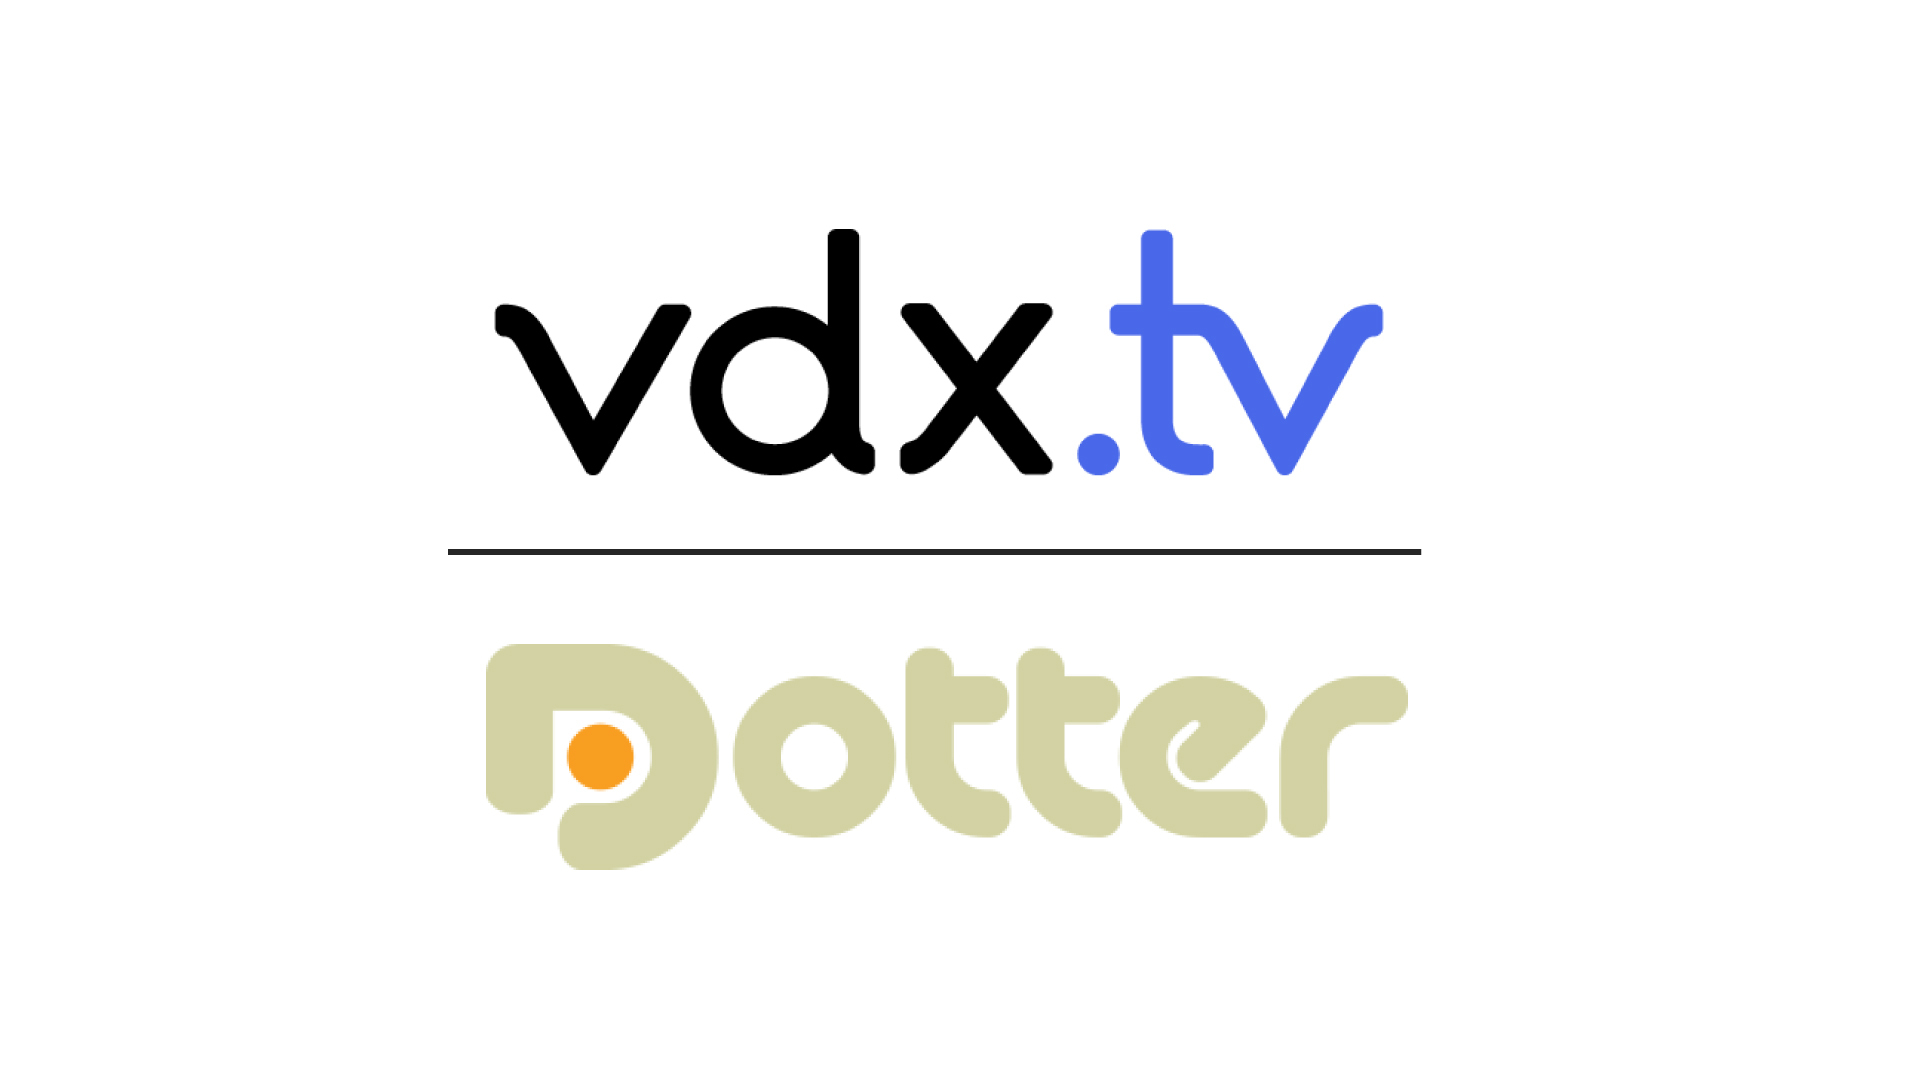 VDX.tv Strategic Partner Integration with Dotter Enables Shoppable Ad Experience for Video Campaigns